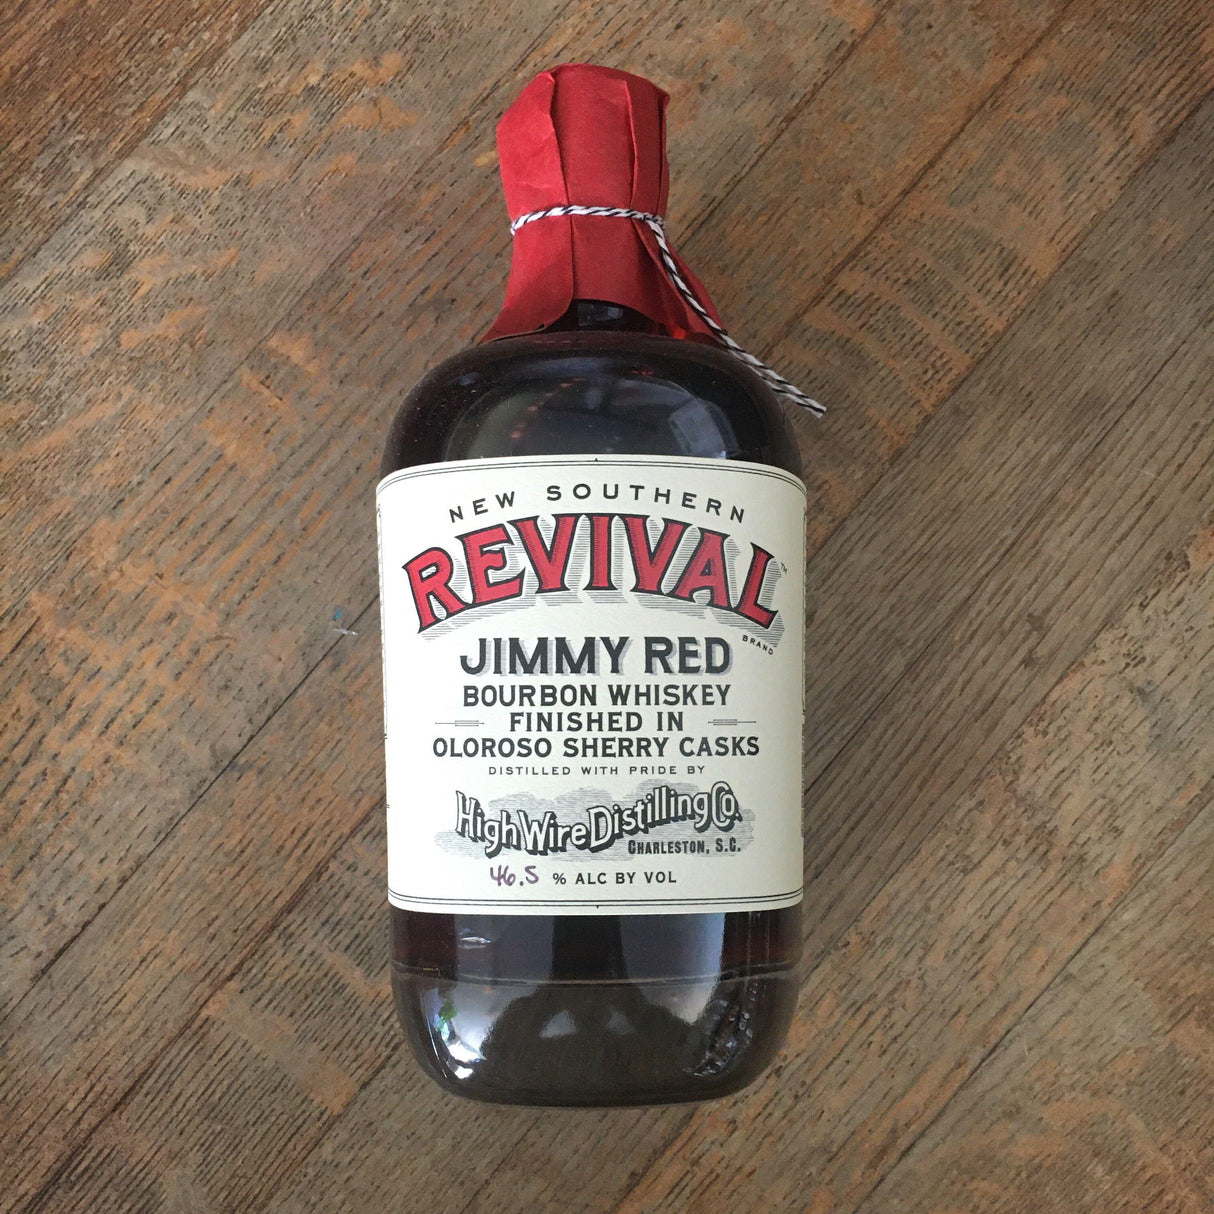 High Wire Distilling Company New Southern Revival Jimmy Red Bourbon Whiskey Finished In Oloroso Sherry Casks - De Wine Spot | DWS - Drams/Whiskey, Wines, Sake